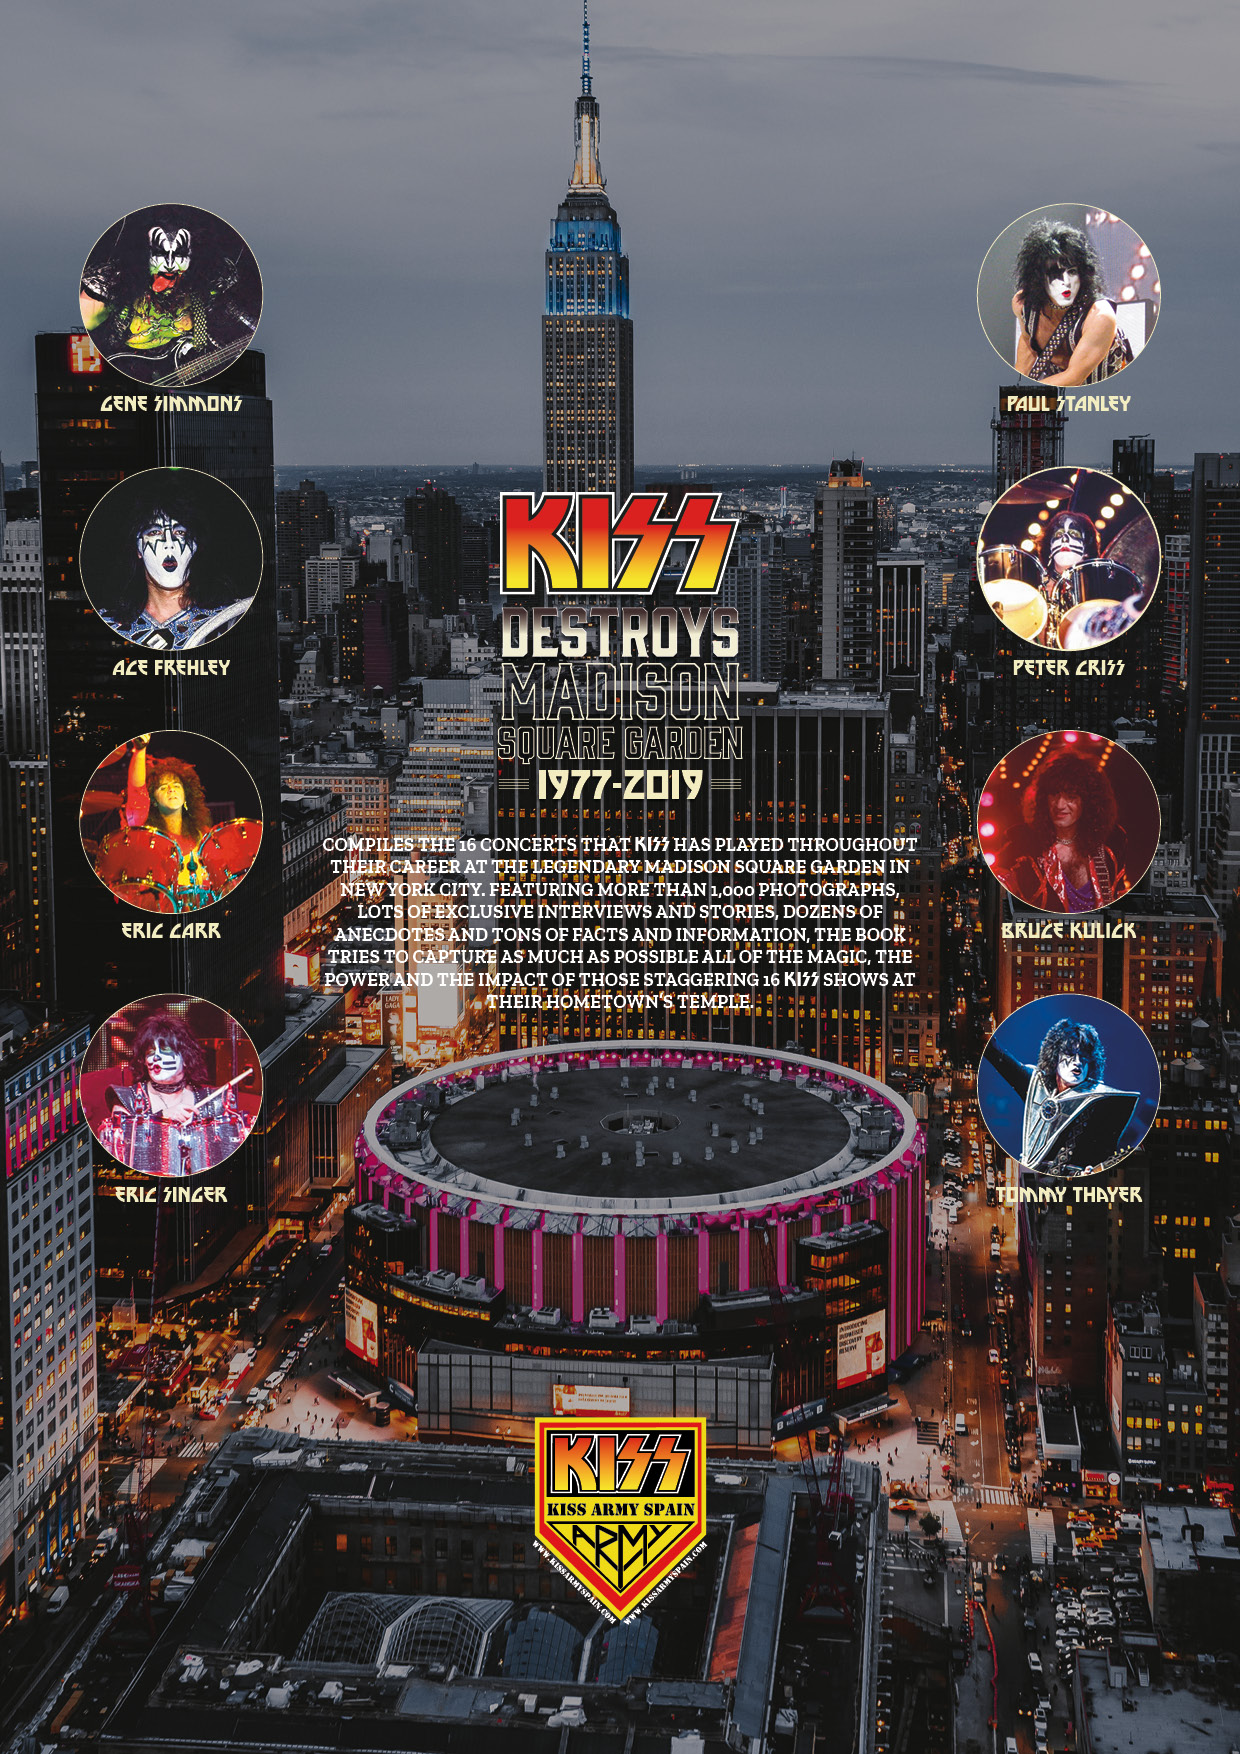 NEW KISS ARMY SPAIN FAN CLUB PACKAGE WITH THE EXCLUSIVE PUBLICATION